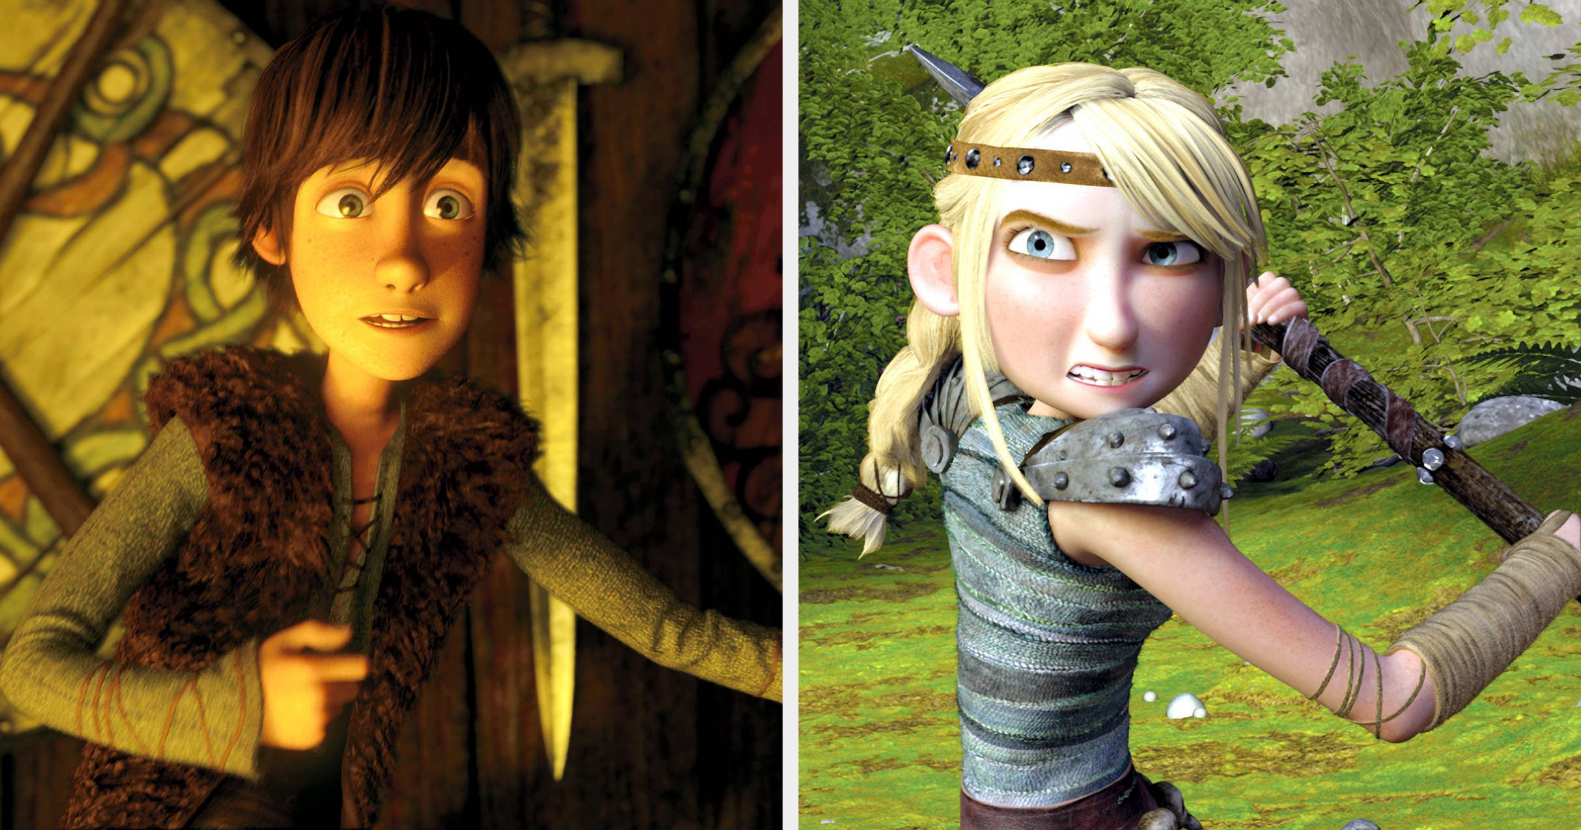 dawn duhamel recommends How To Train Your Dragon Hiccup And Astrid Sex